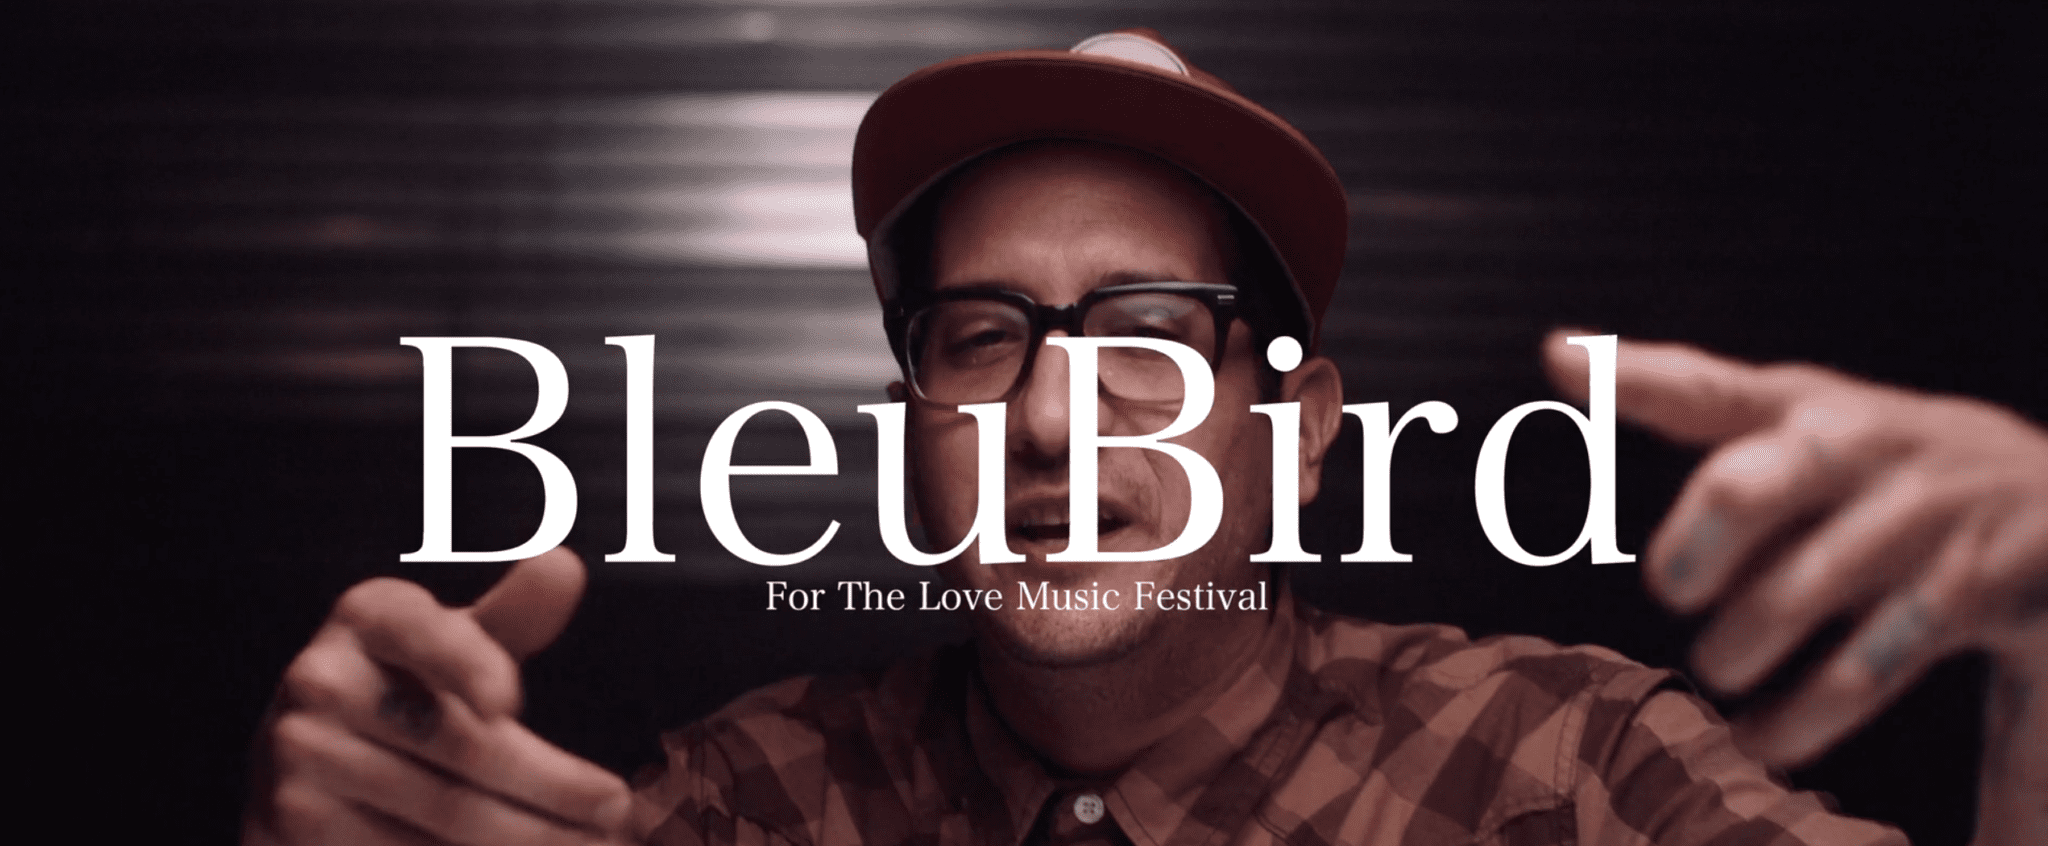 Ad for For The Love Music Festival, featuring Bleu Bird